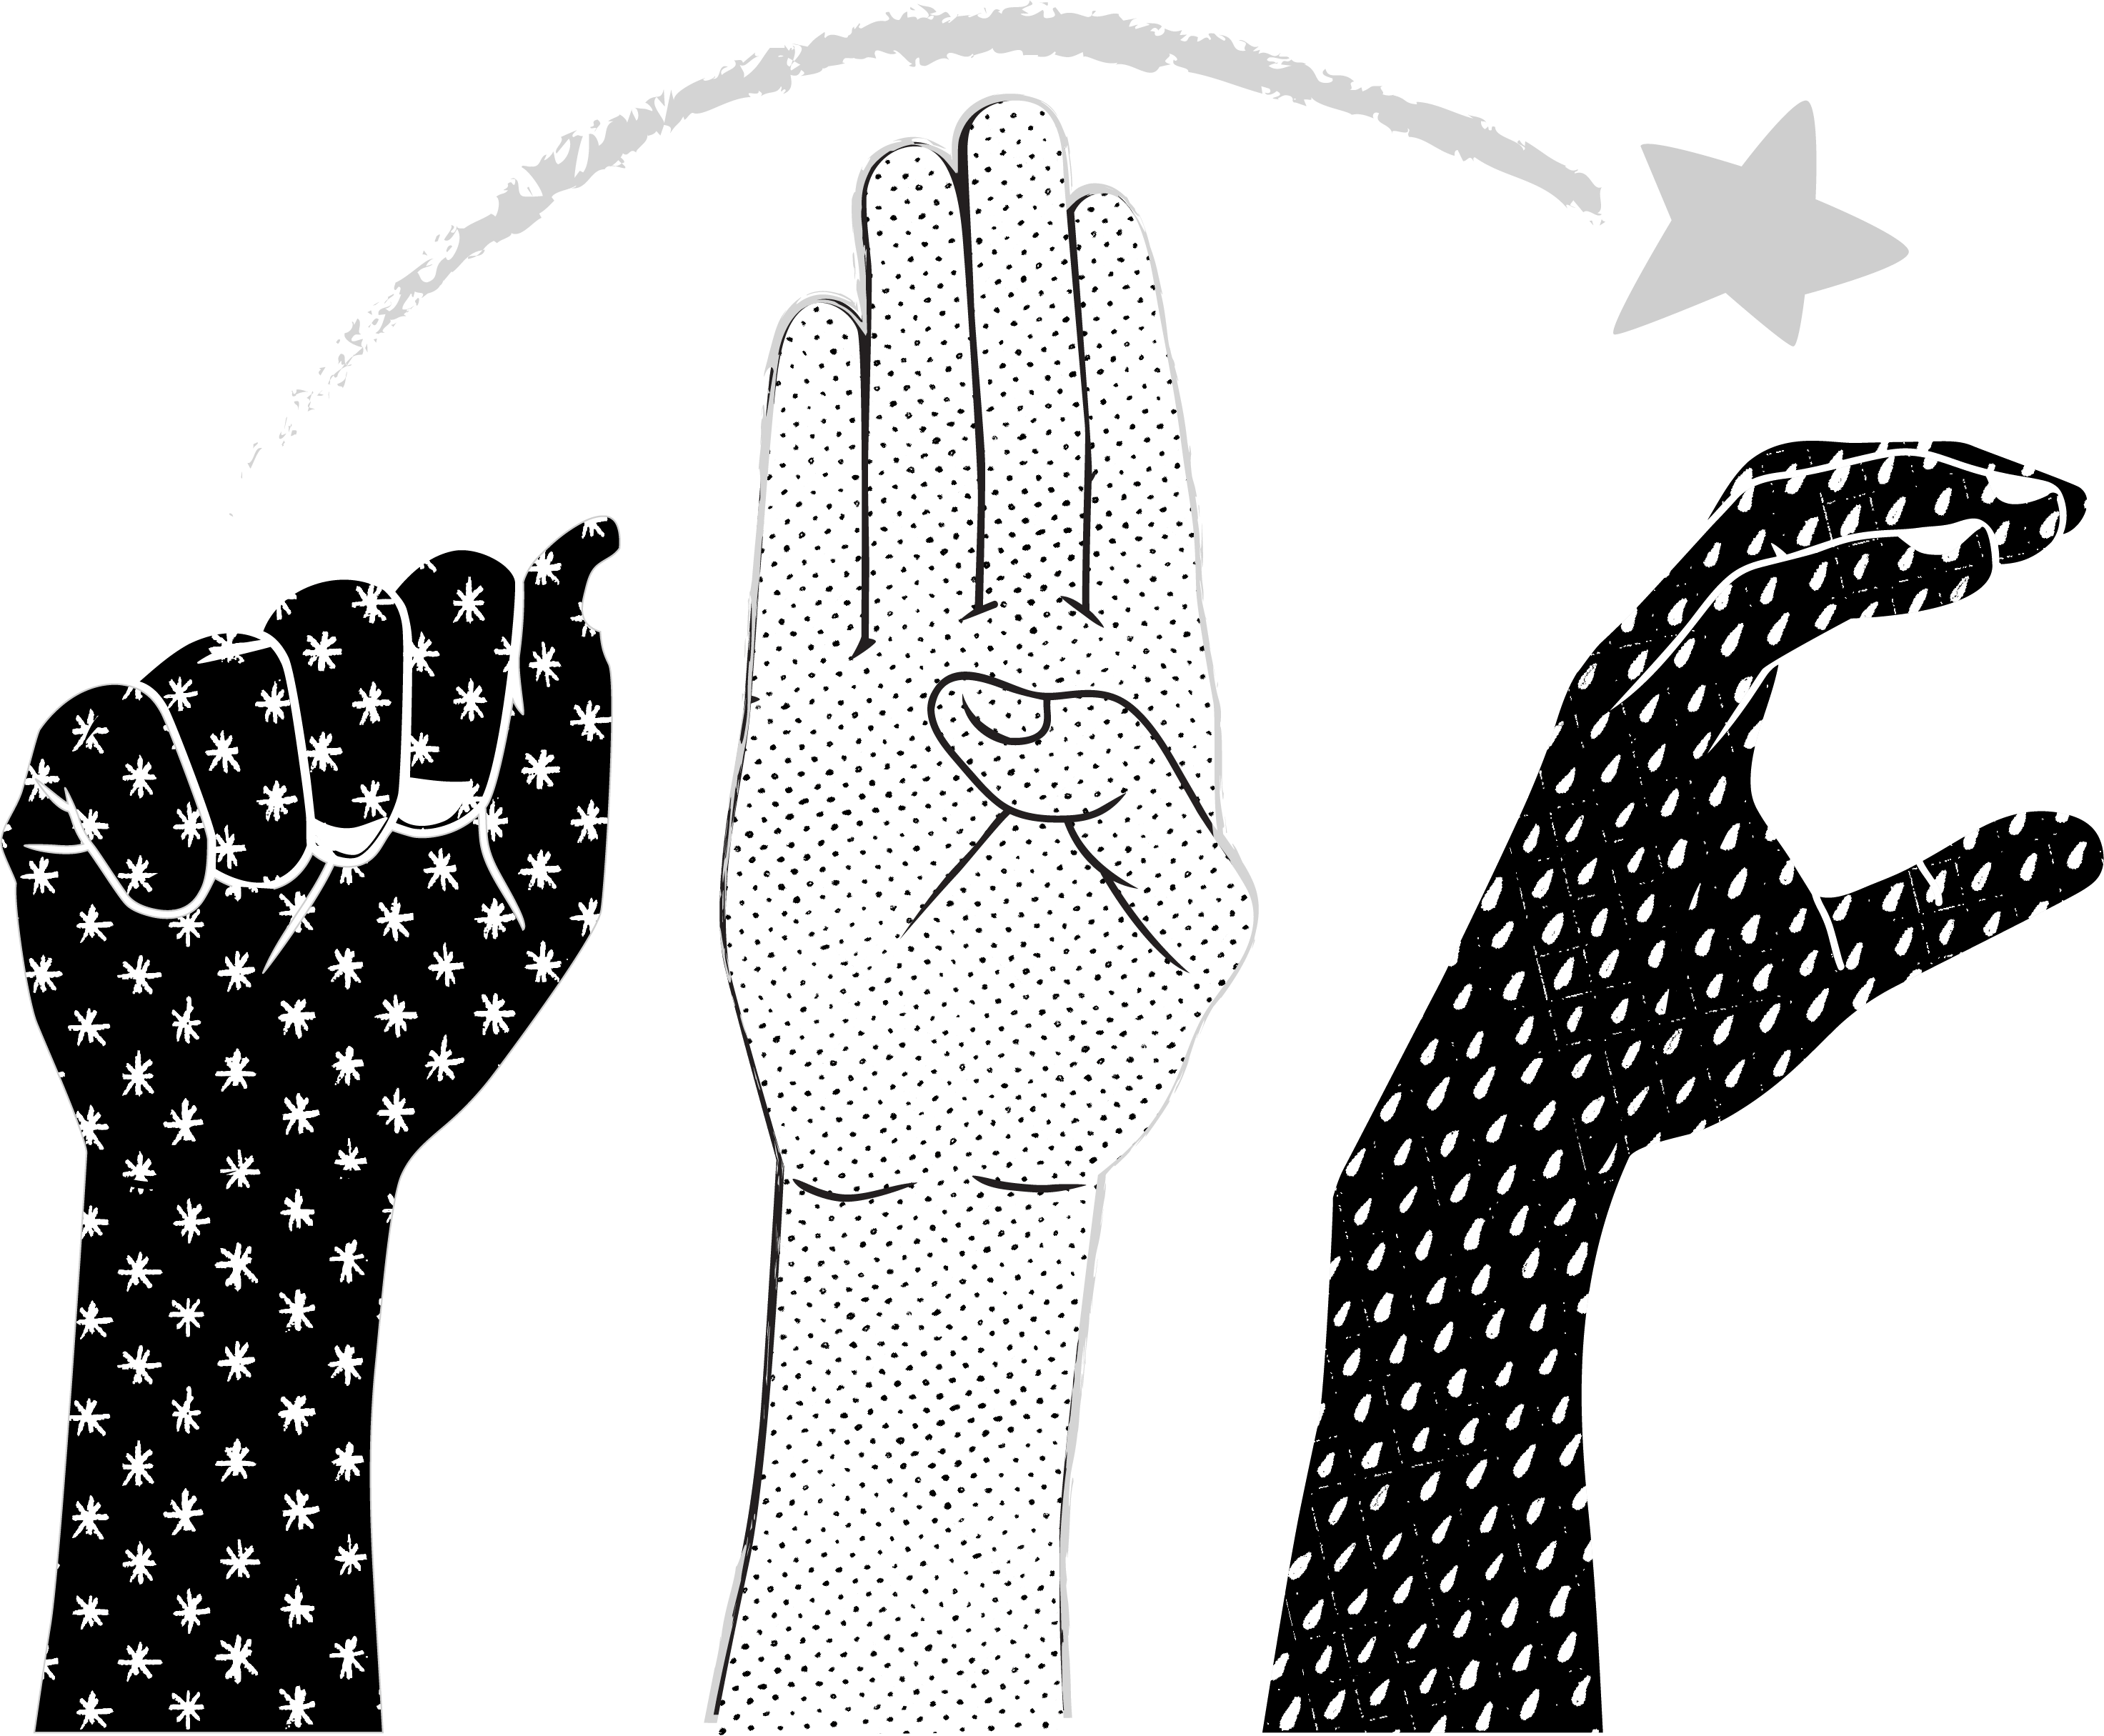 hands signing "ABC" in ASL